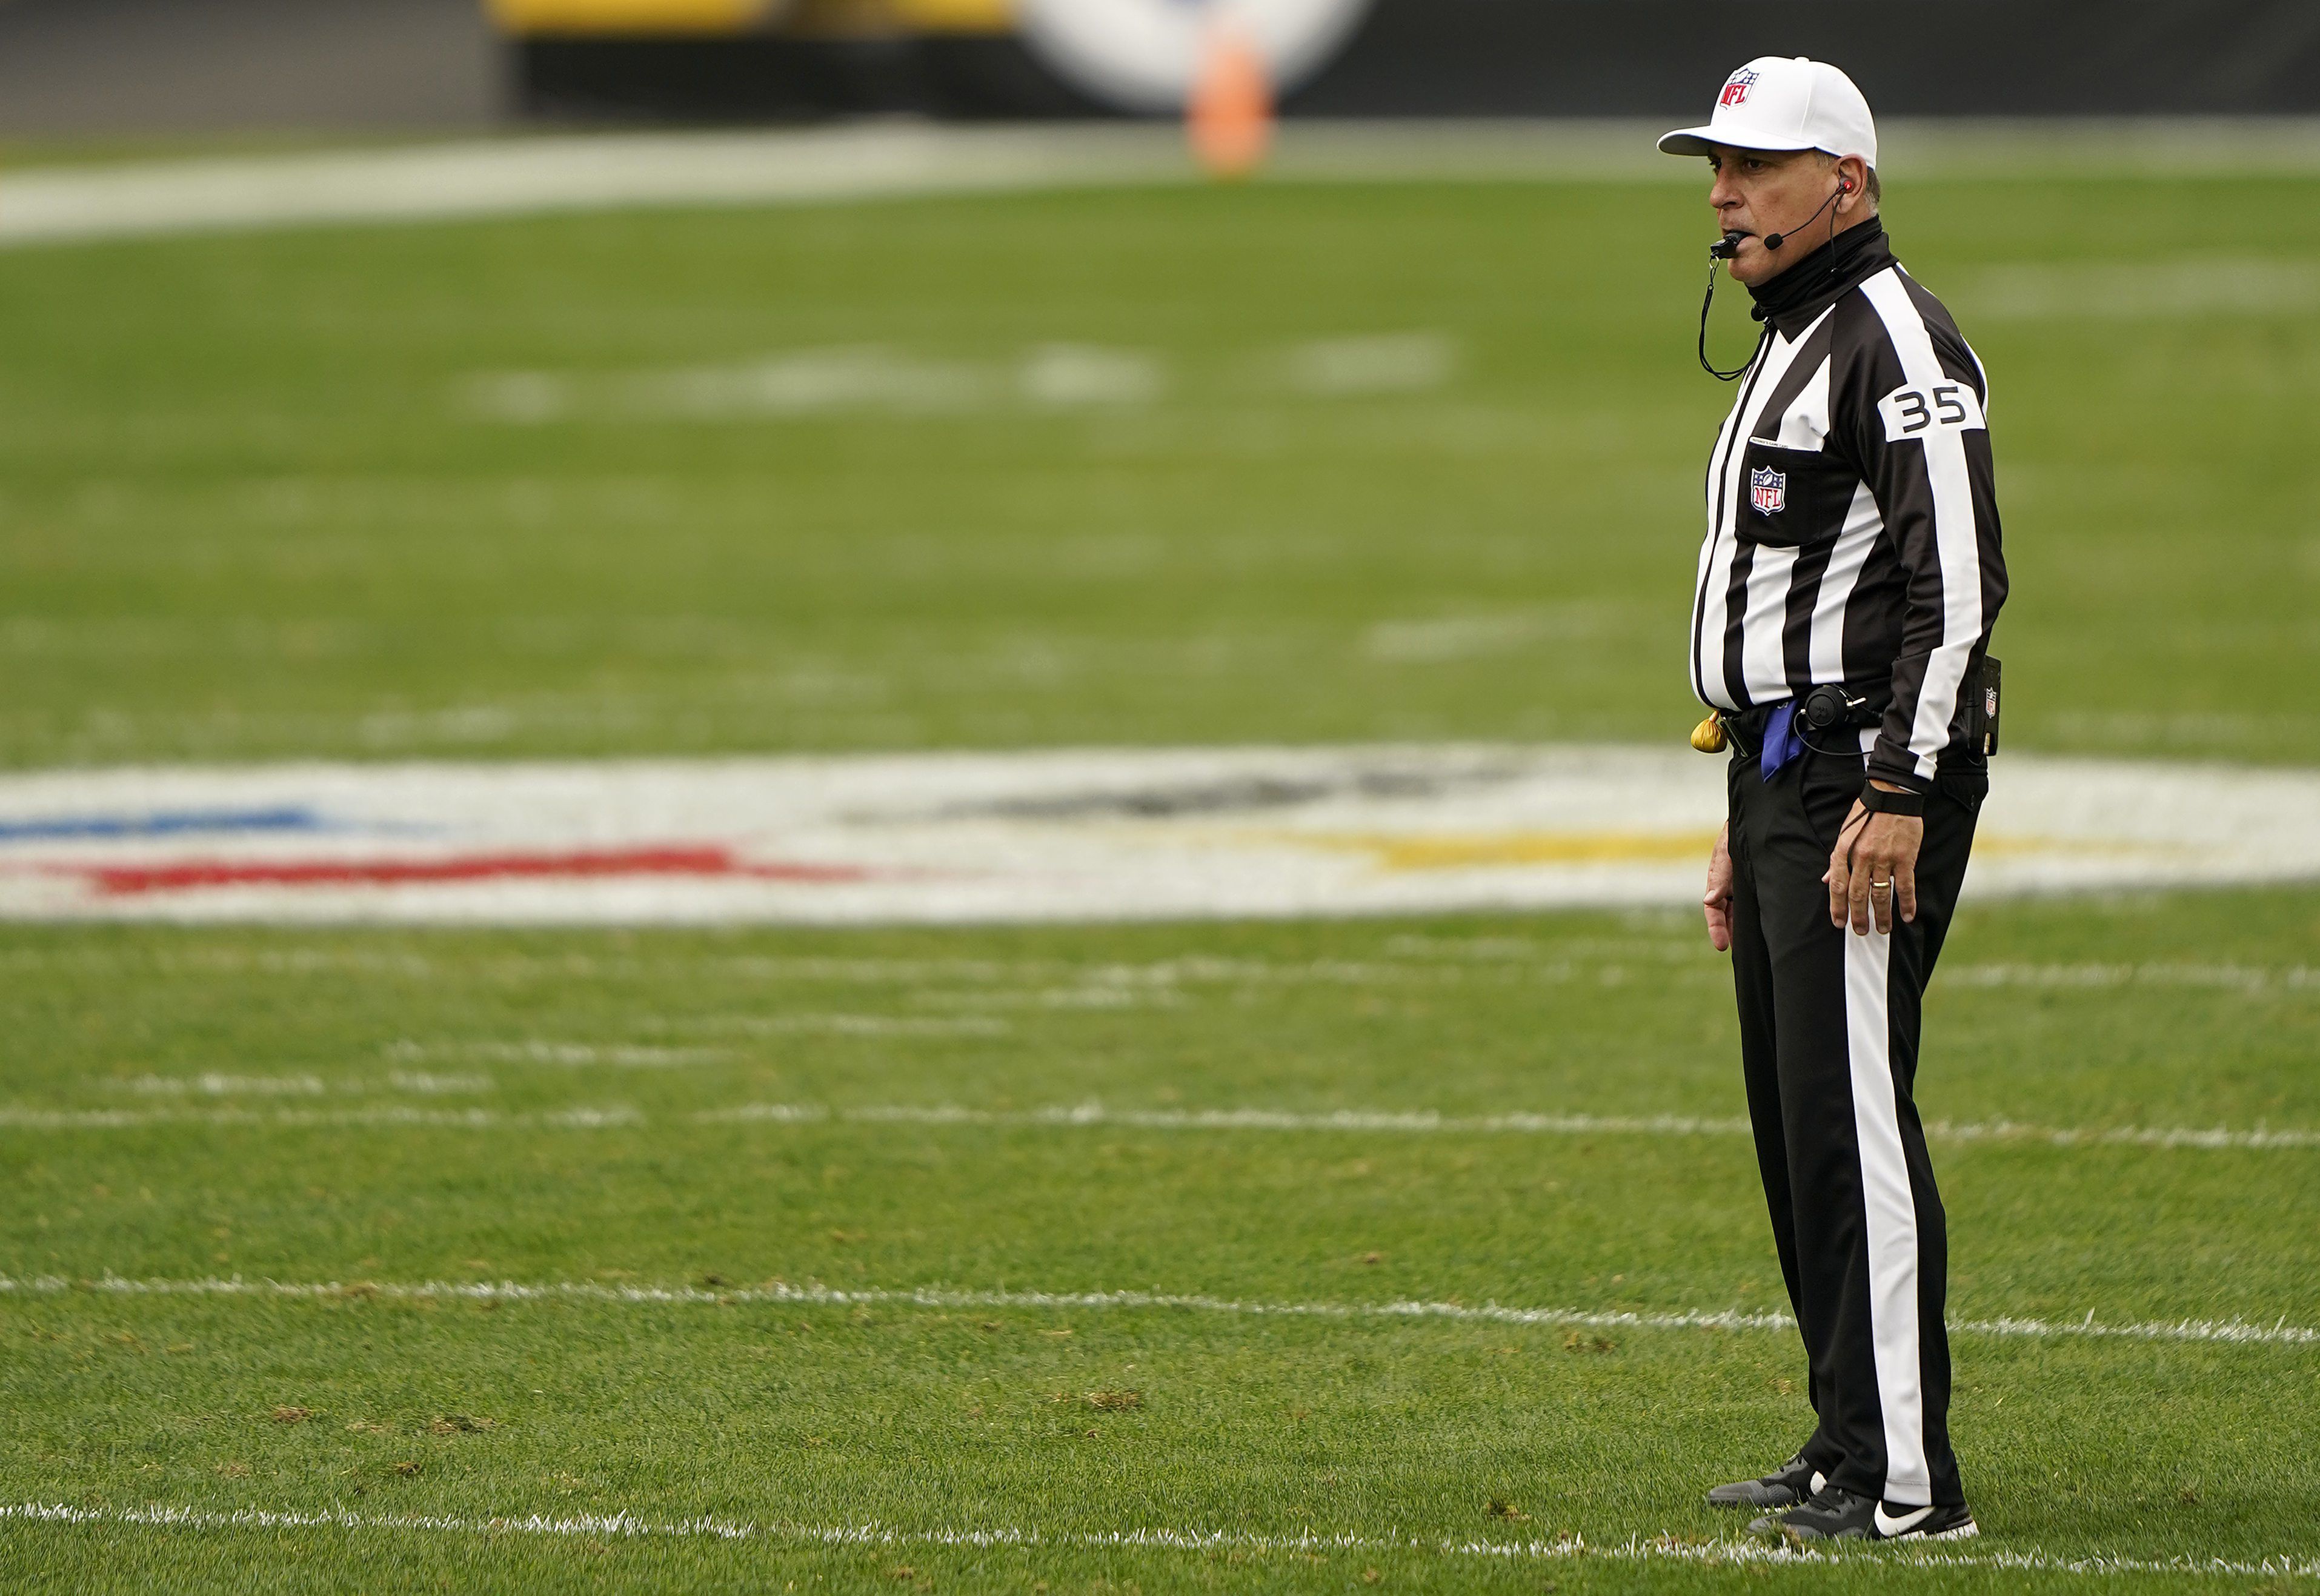 Philly Special Should've Been Called a Penalty, Says Ex-NFL Ref